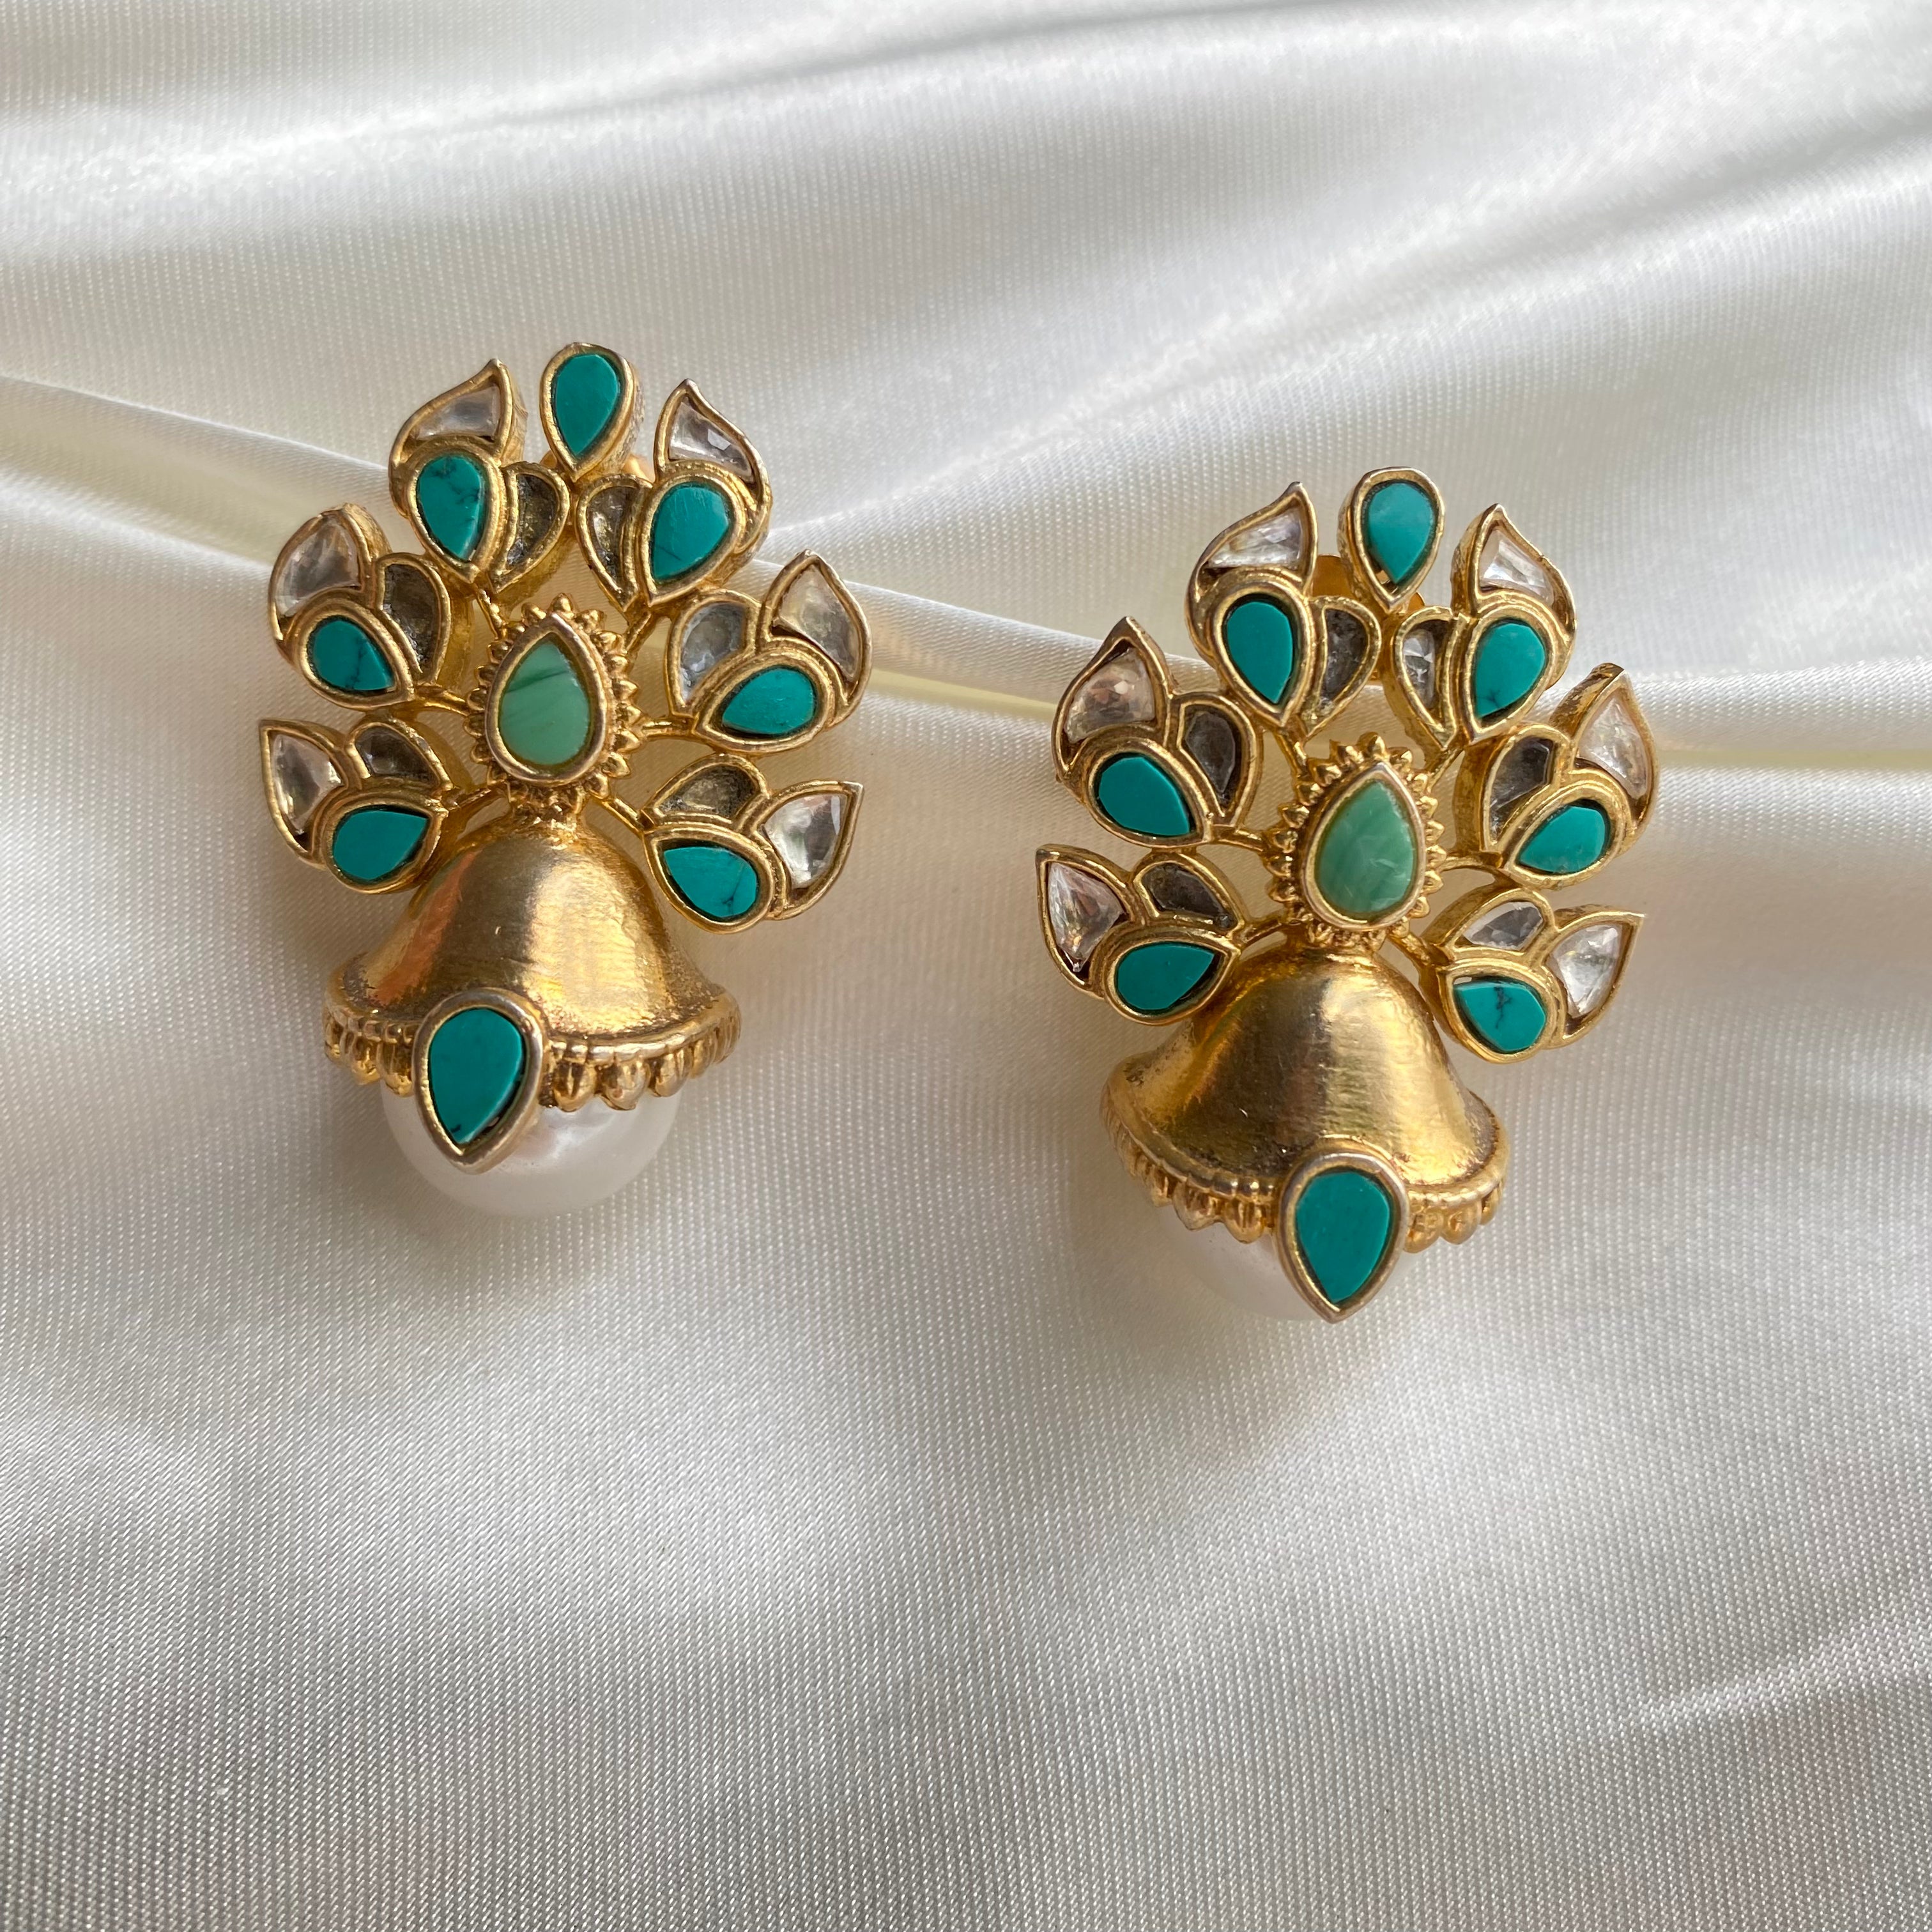 Canopy Bell Earrings - Turquoise